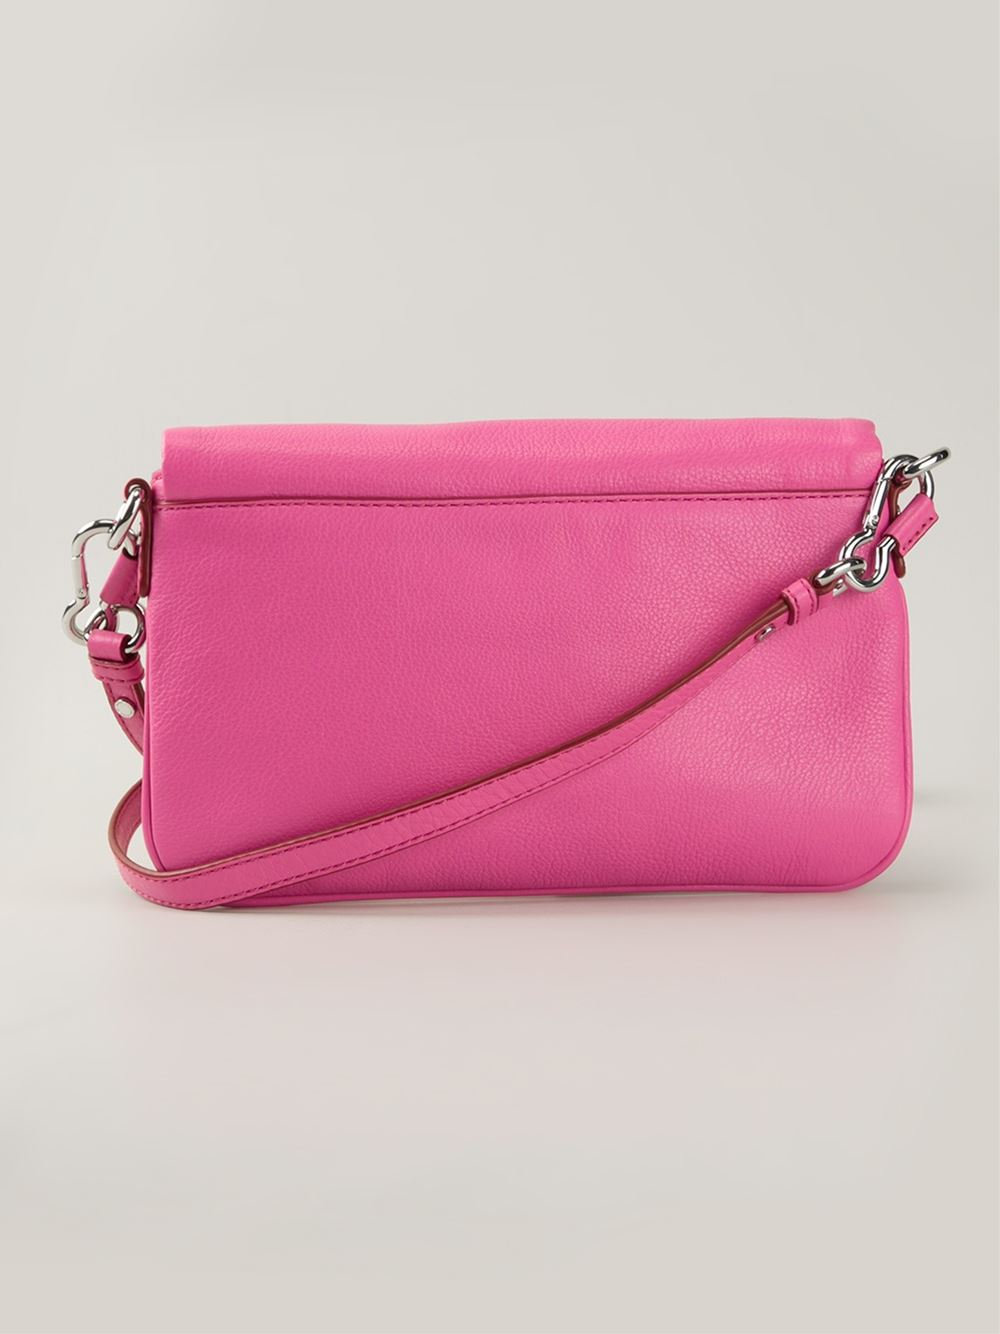 Marc by marc jacobs &#39;Too Hot To Handle Flap Percy&#39; Crossbody Bag in Pink (pink & purple) | Lyst